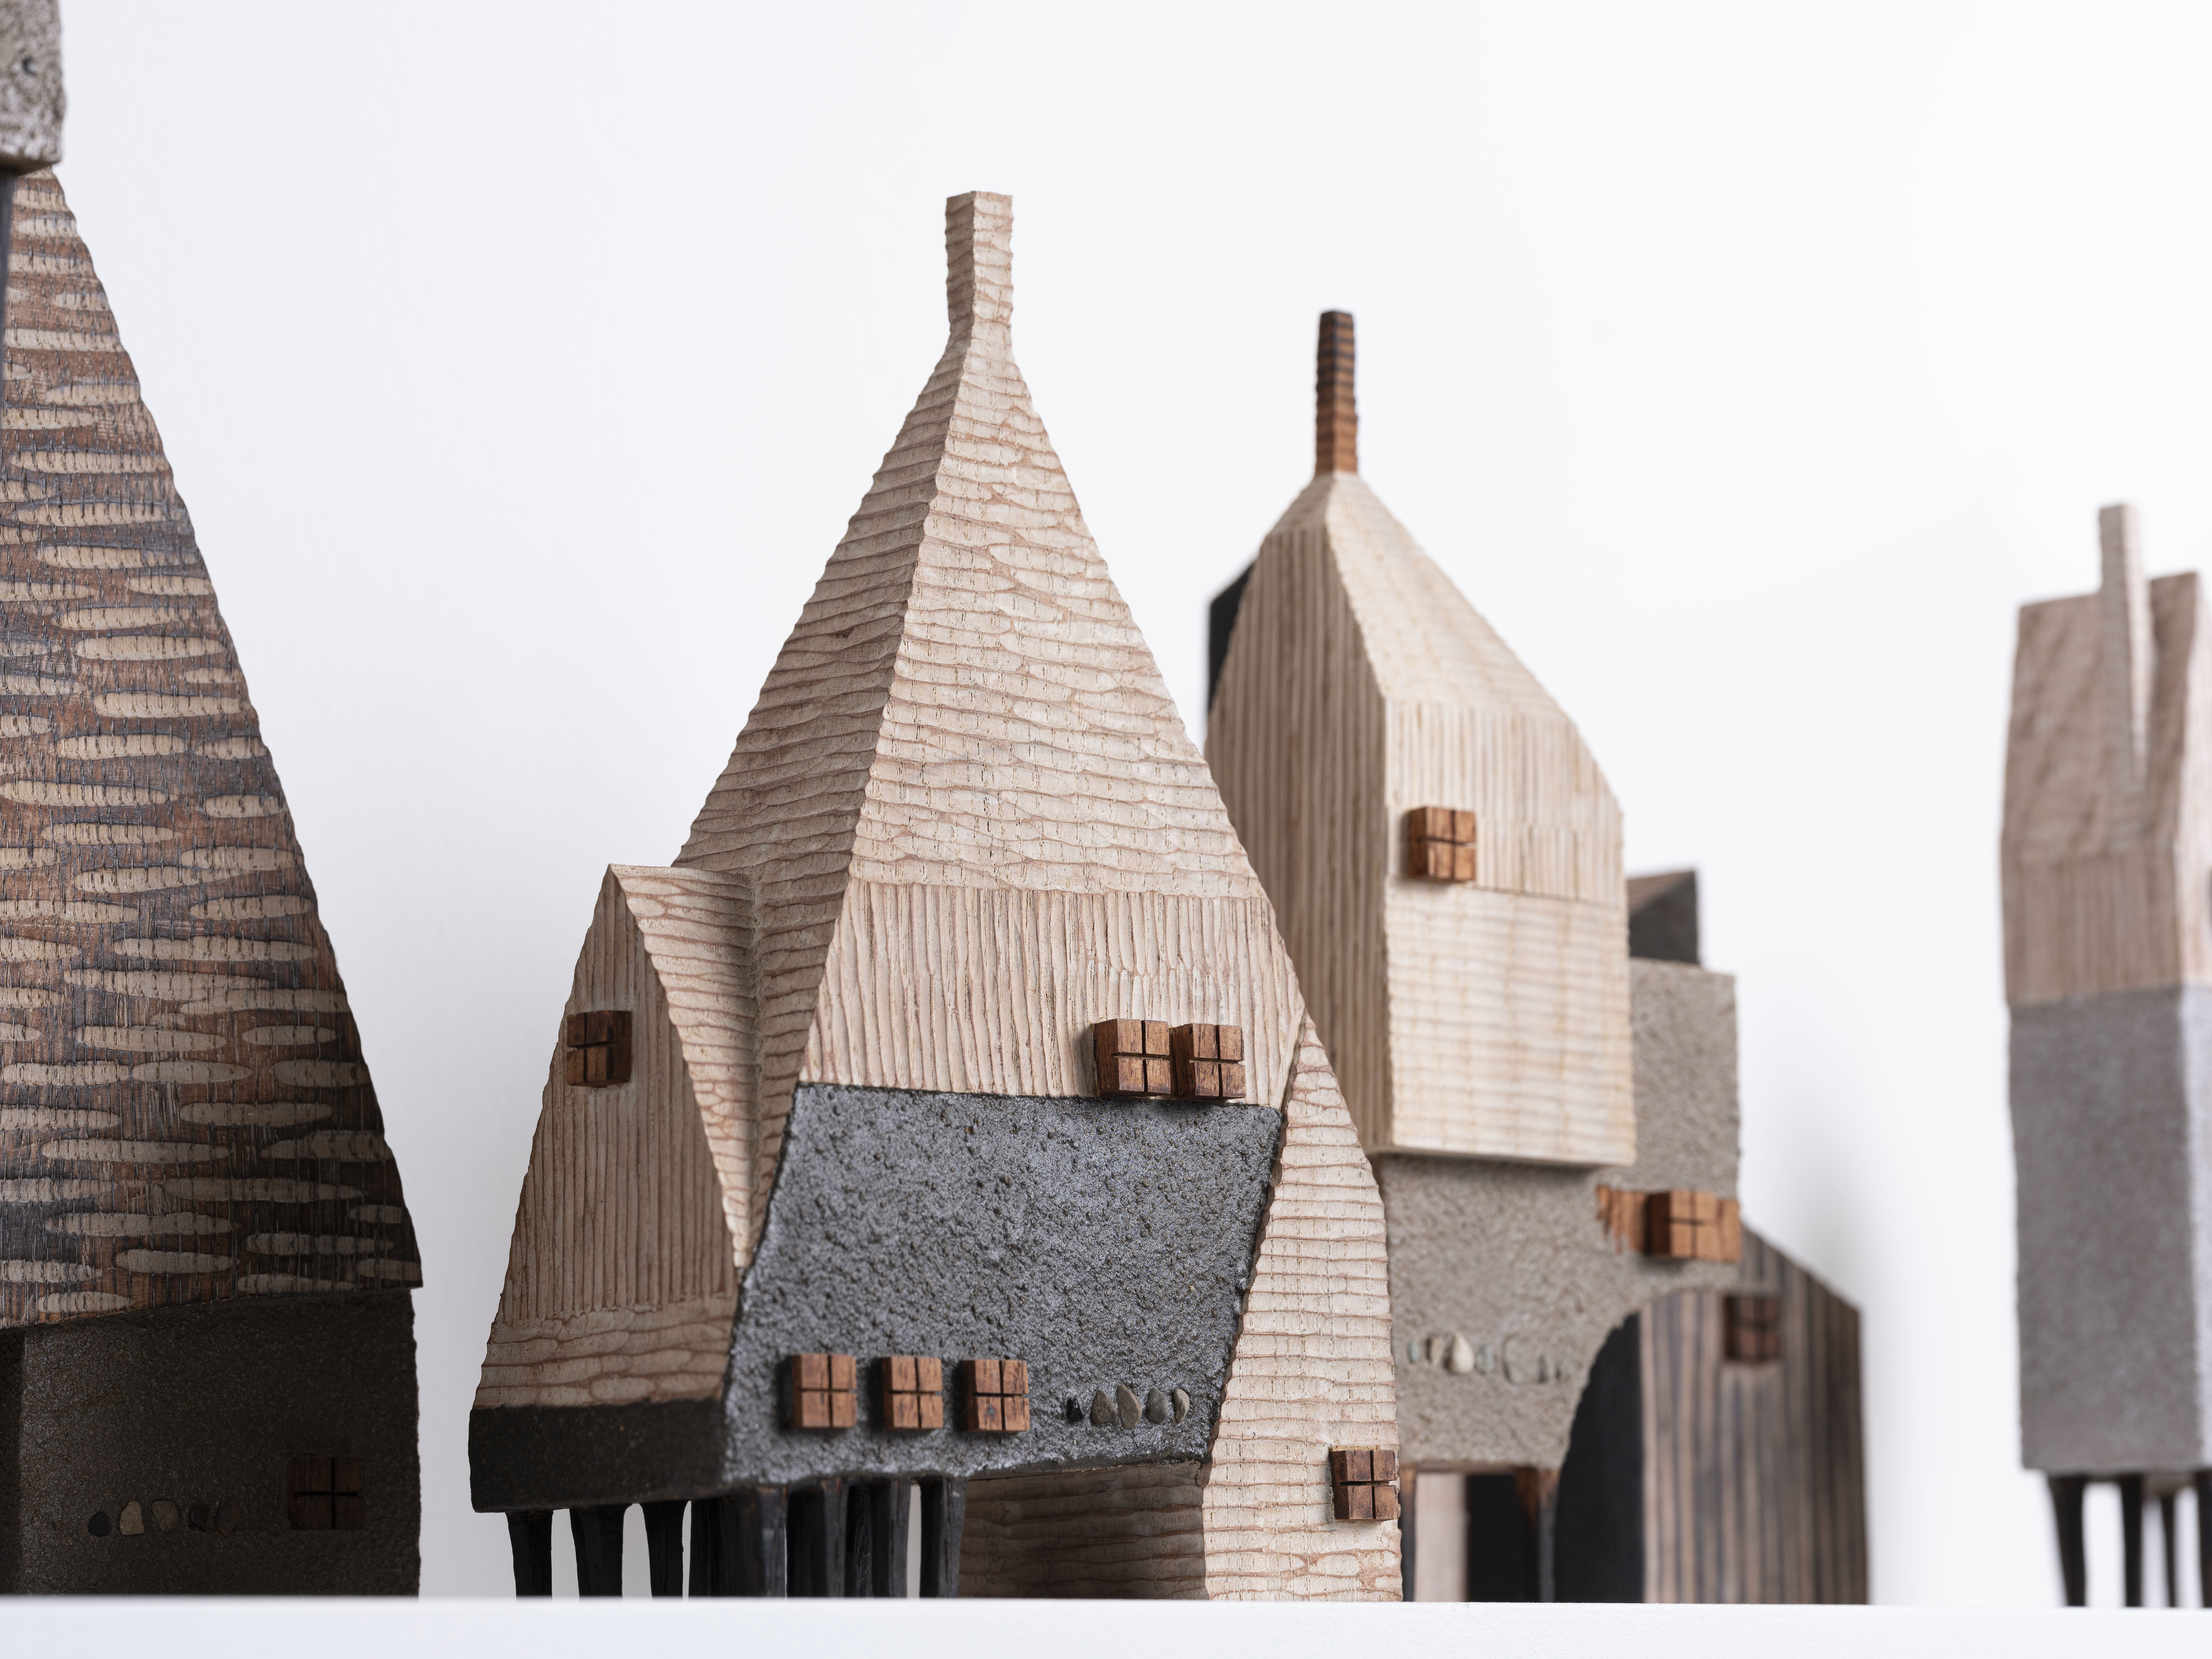 Miniature wooden houses.